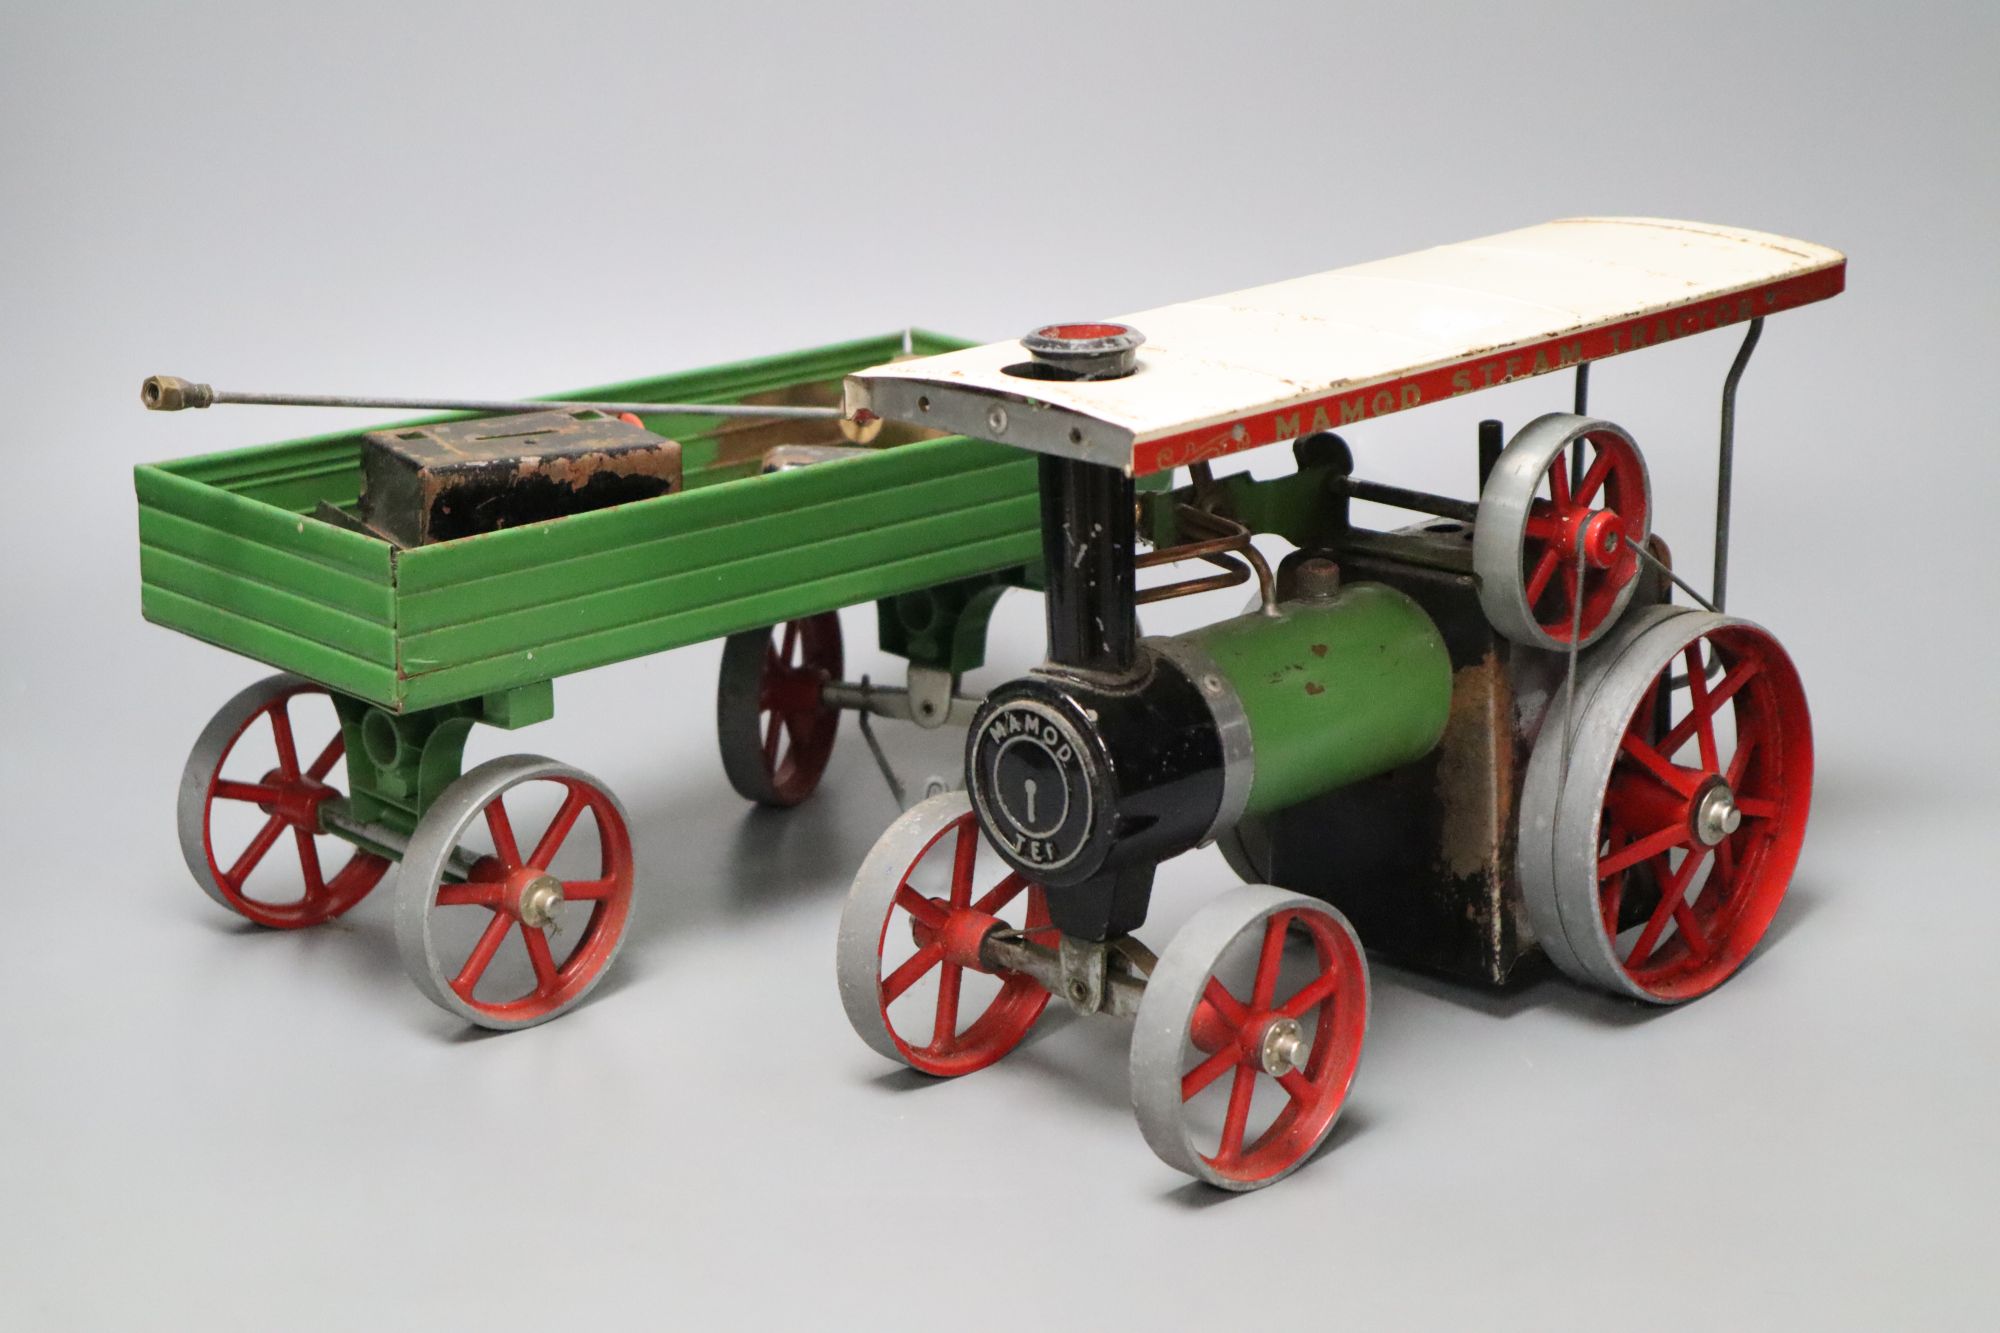 A Mamod steam tractor and wagon